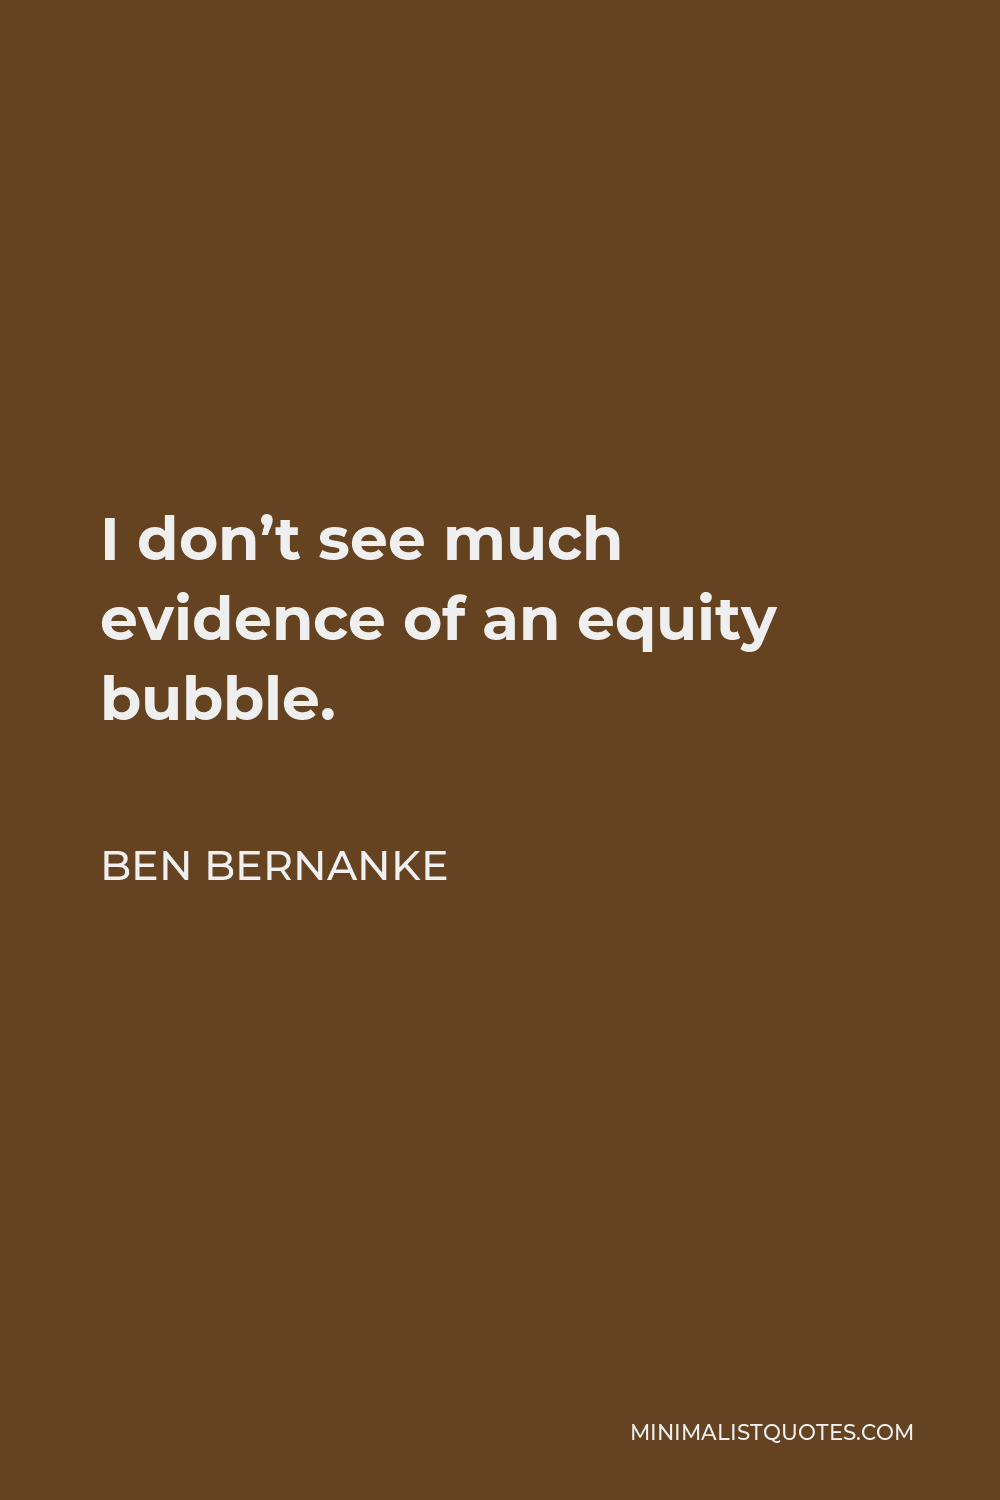 Ben Bernanke Quote - I don’t see much evidence of an equity bubble.